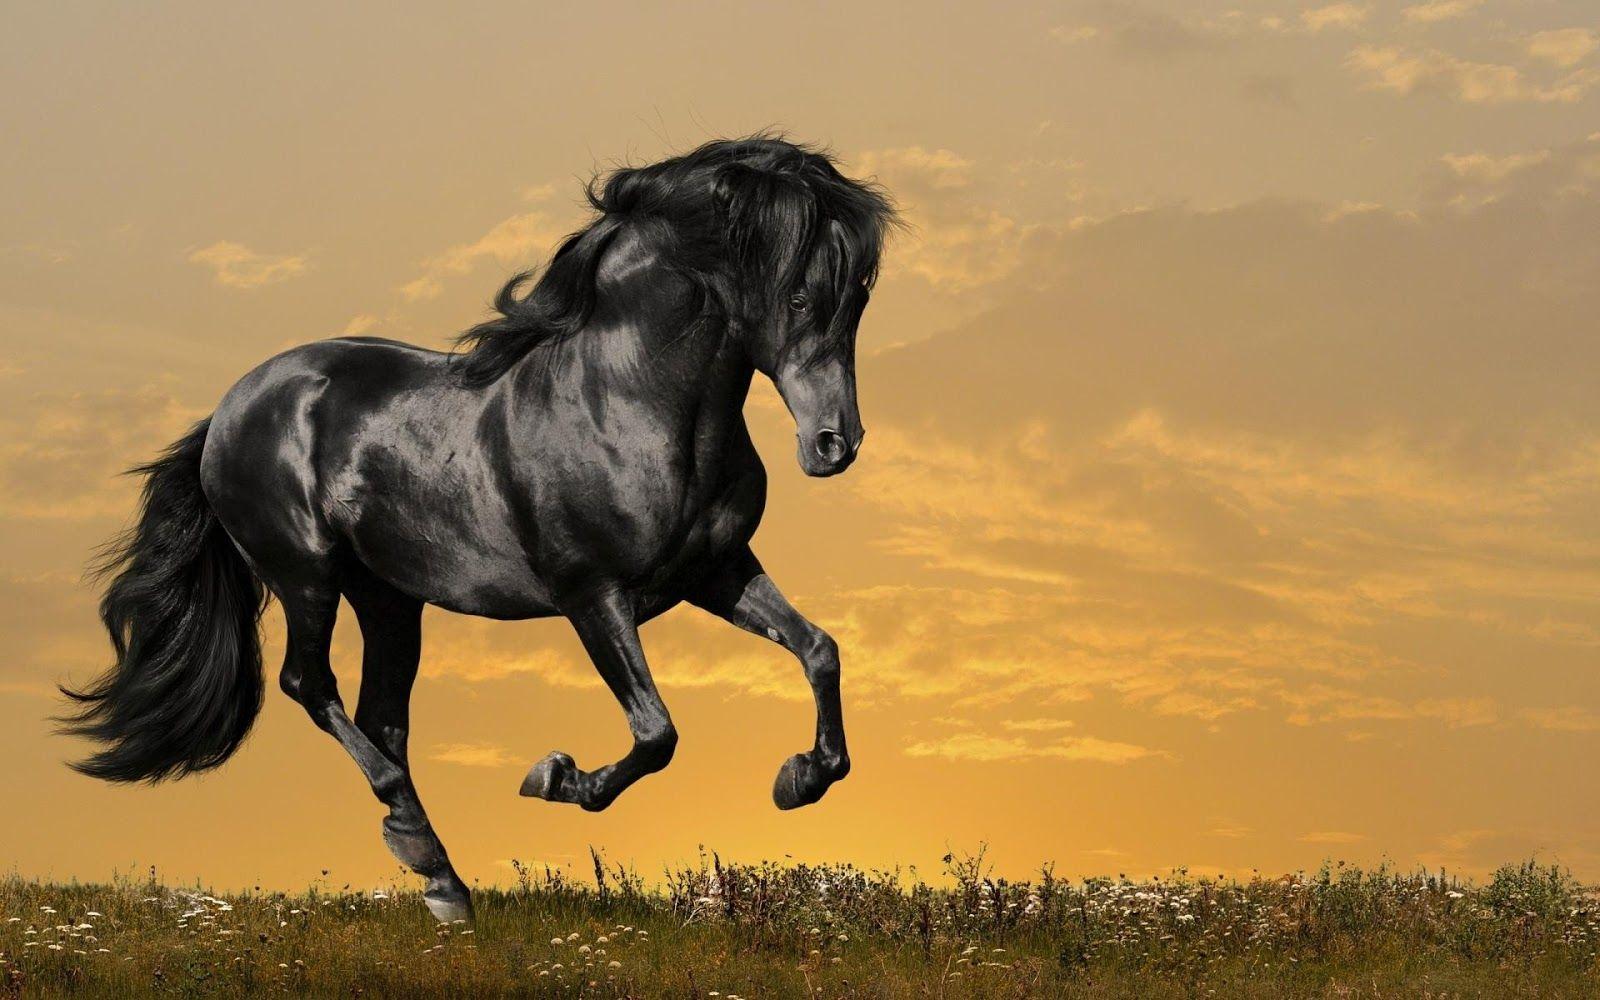 Beautiful Animals Horse Wallpaper Lovely Image And Super Photo